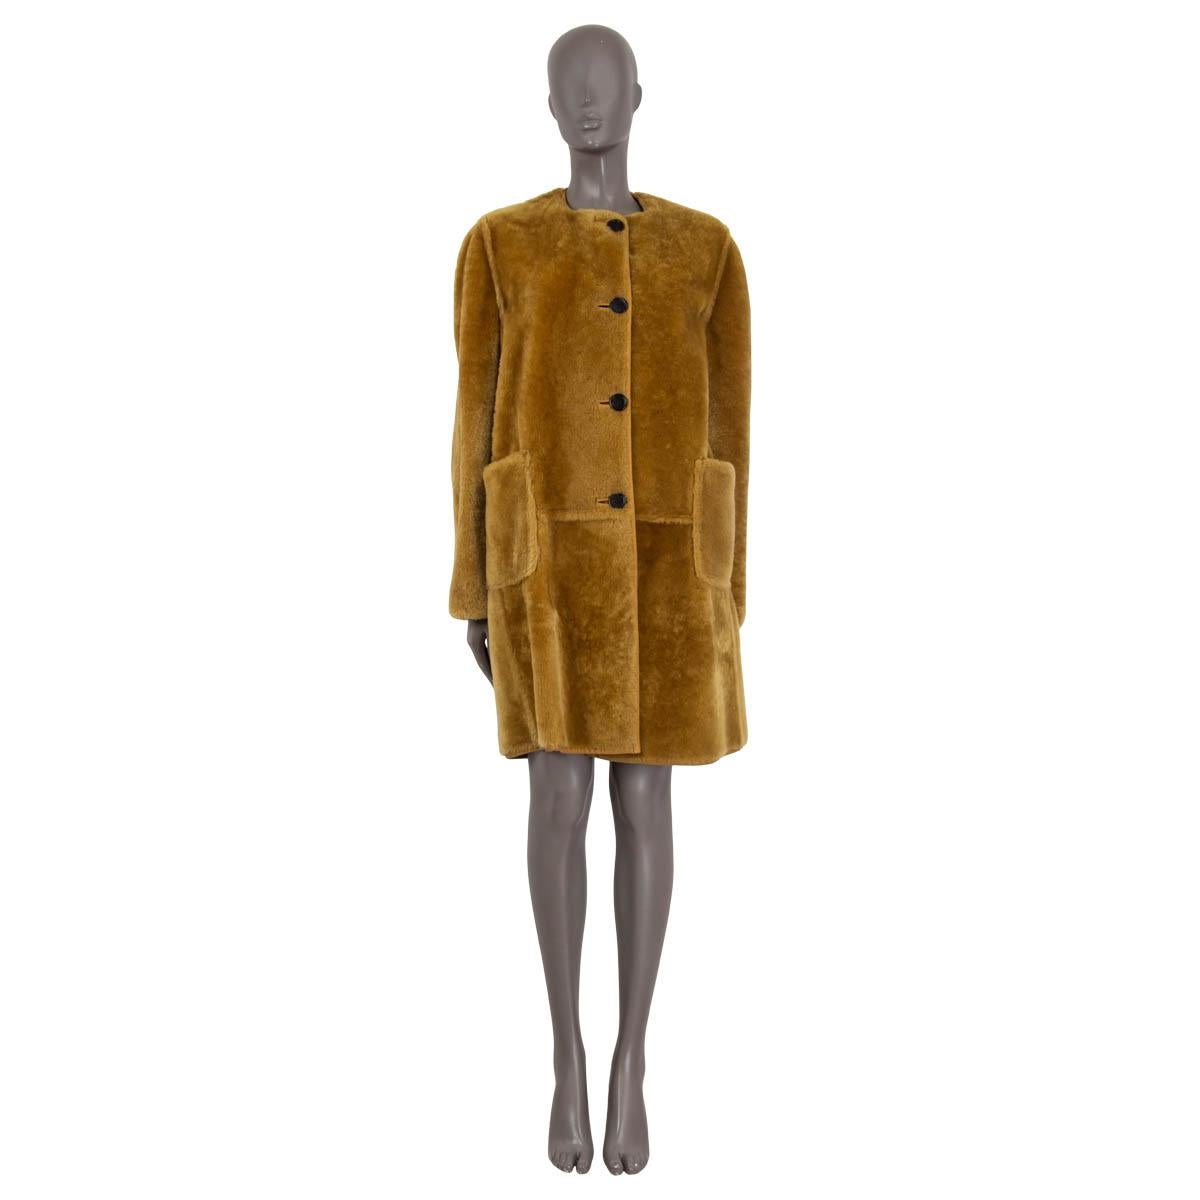 100% authentic Marni reversible long sleeve coat in domesticated lamb shearling (100%). Comes with two front pockets and a crew neck. Opens with four buttons on the front. Unlined. Has been worn and is in excellent condition. 

Measurements
Tag